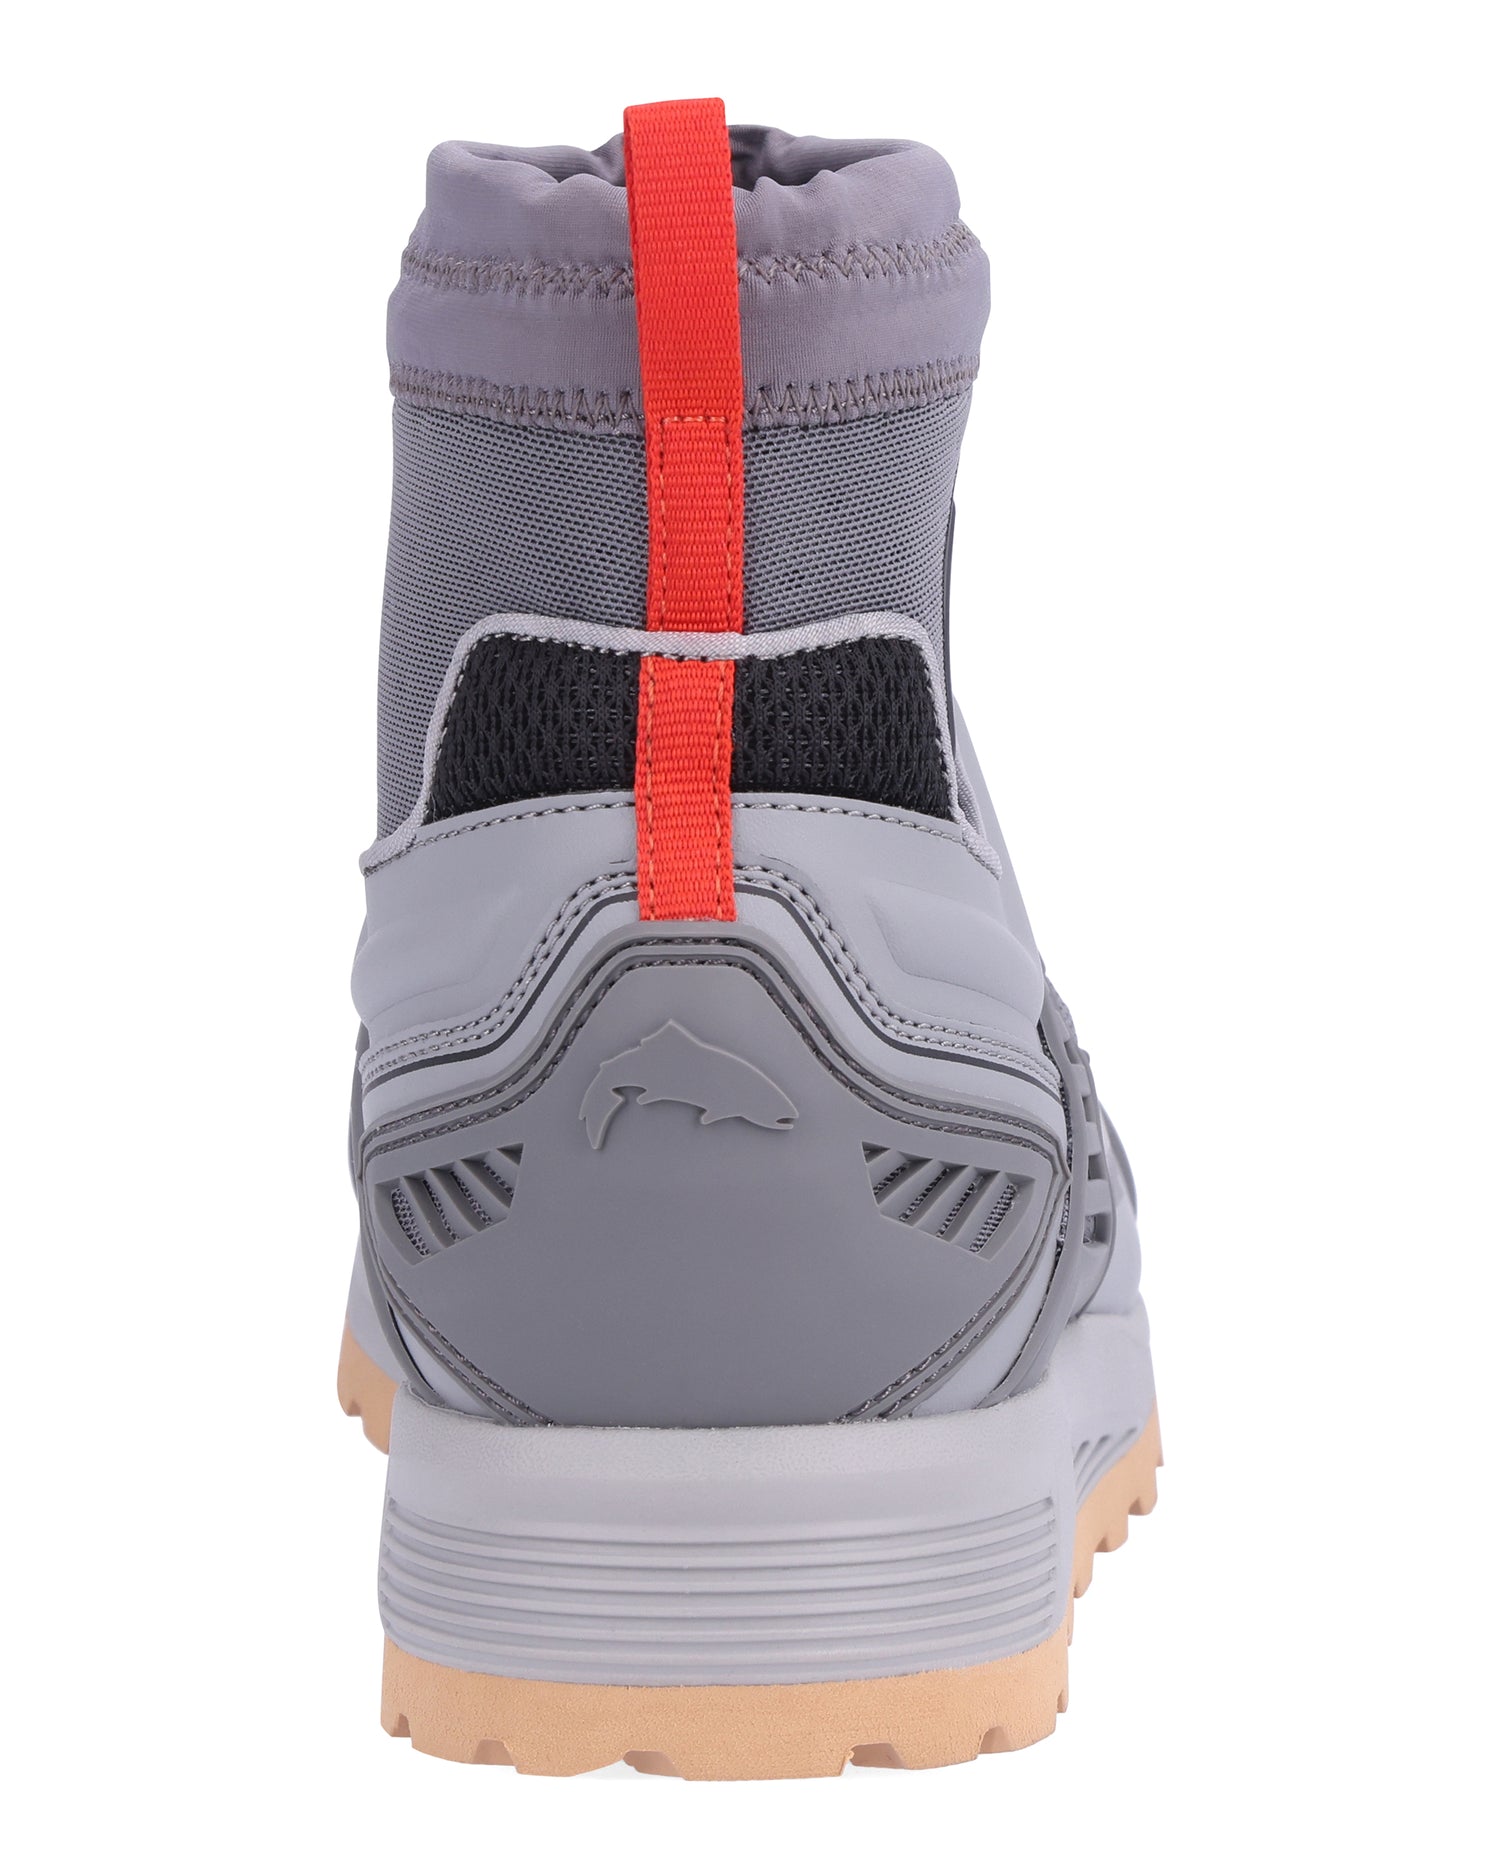     13268-030-flyweight-access-wet-wading-shoe-tabletop